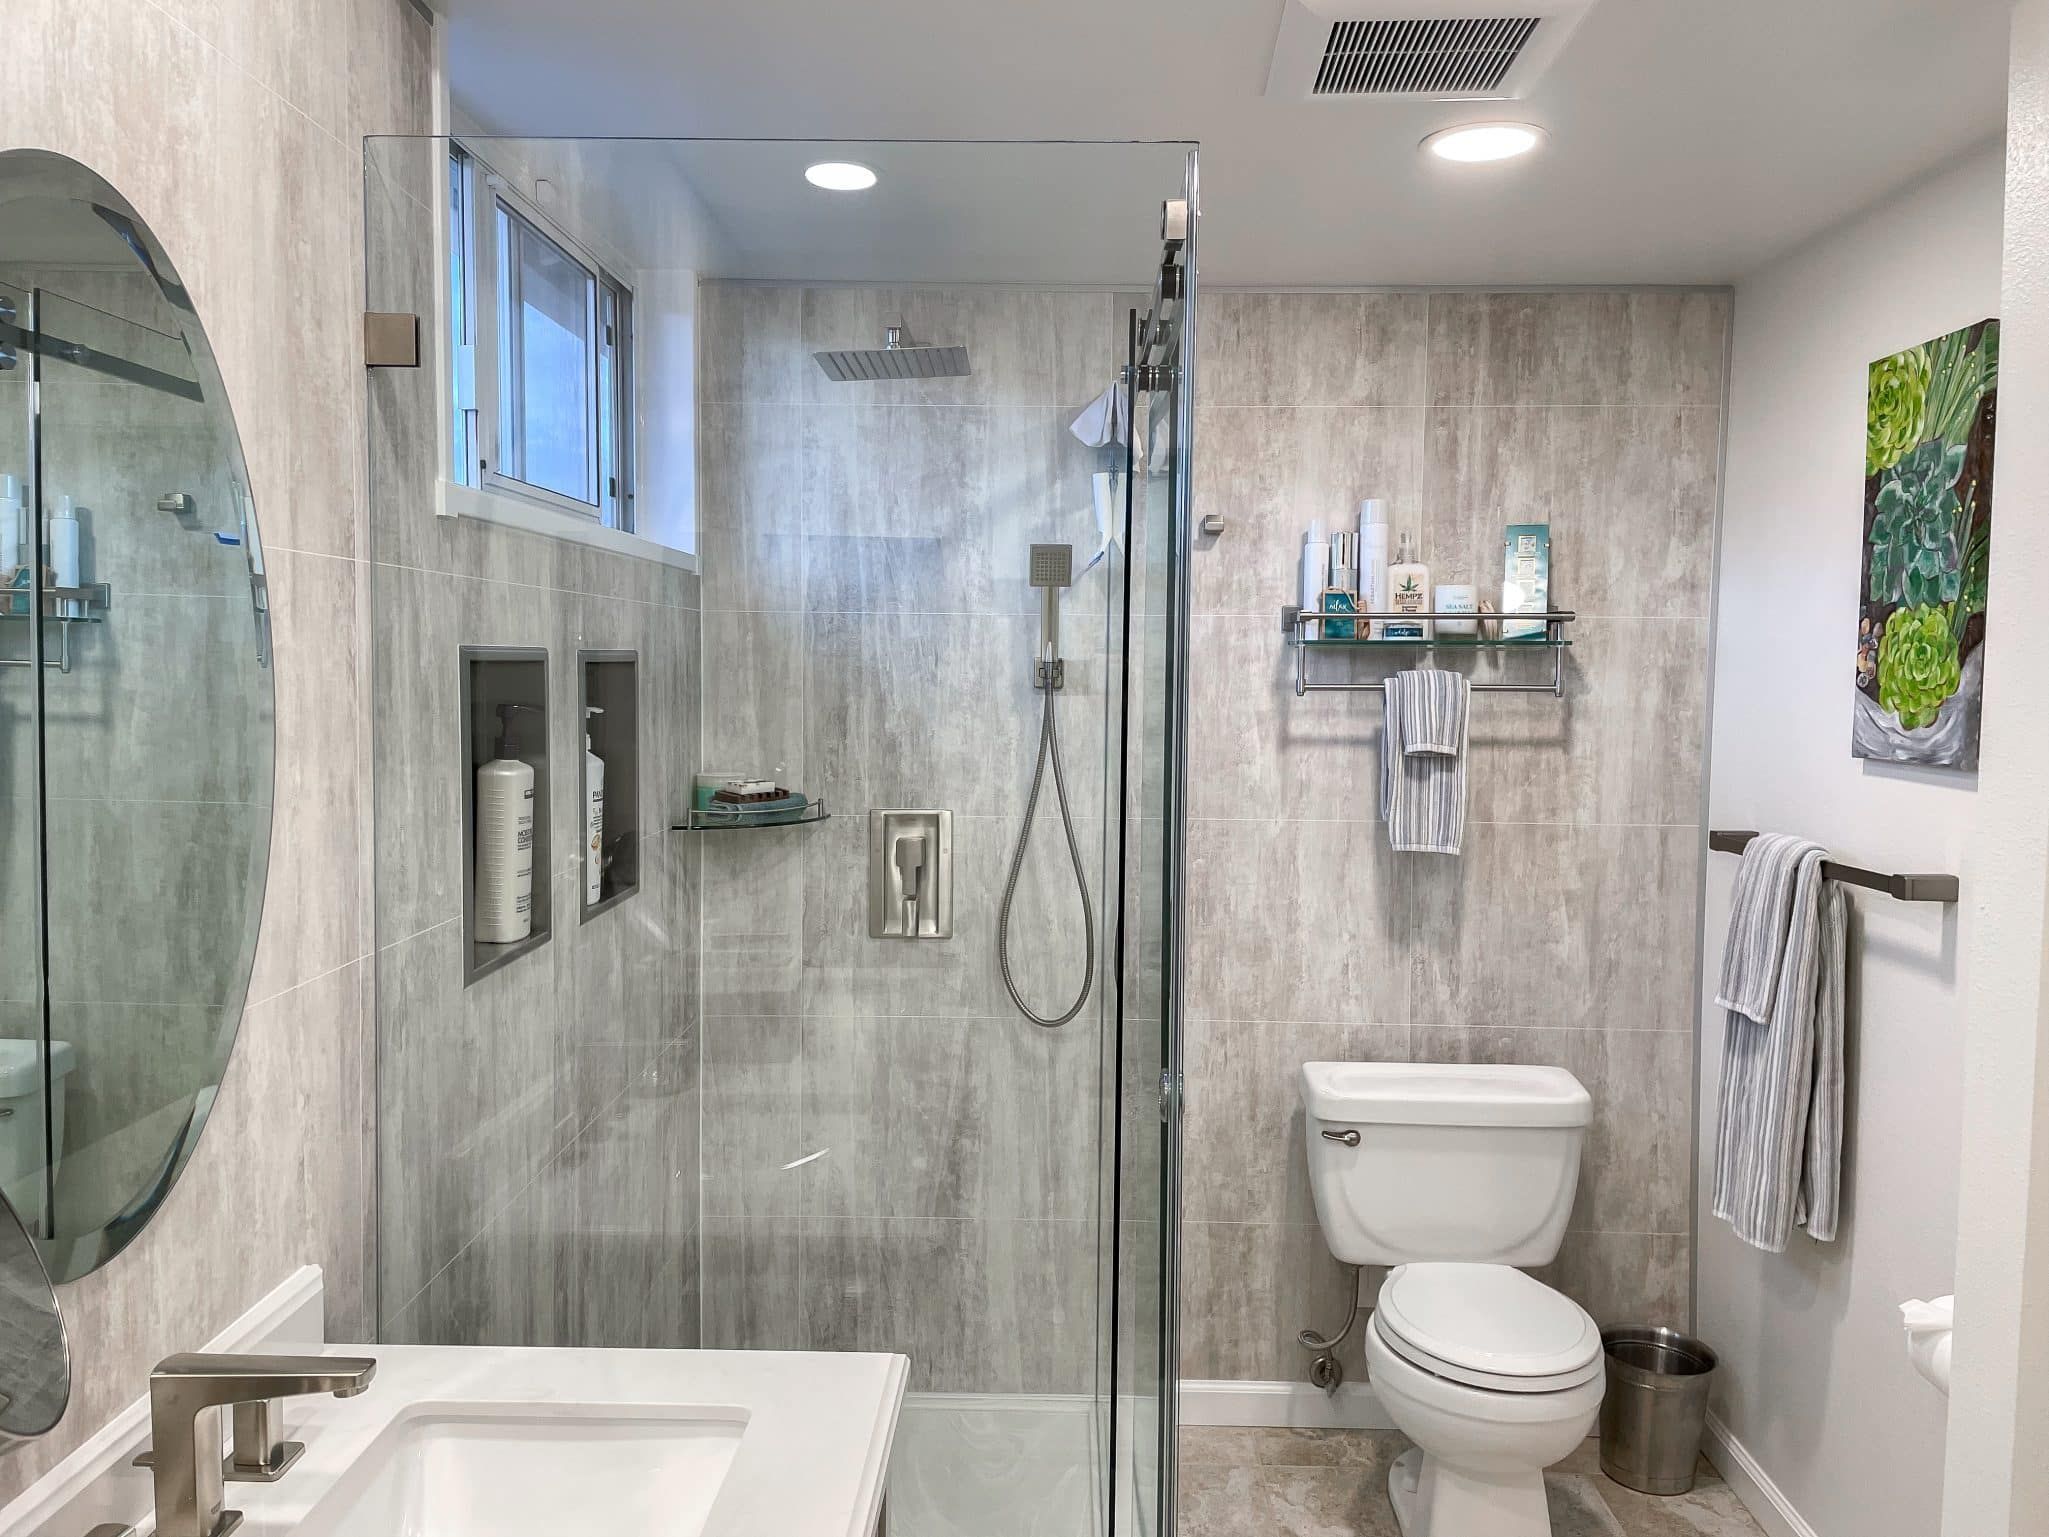 Abbey Shale Waterproof Laminate Wall Panels Bathroom Remodeling Design Ideas in Cleveland, Ohio